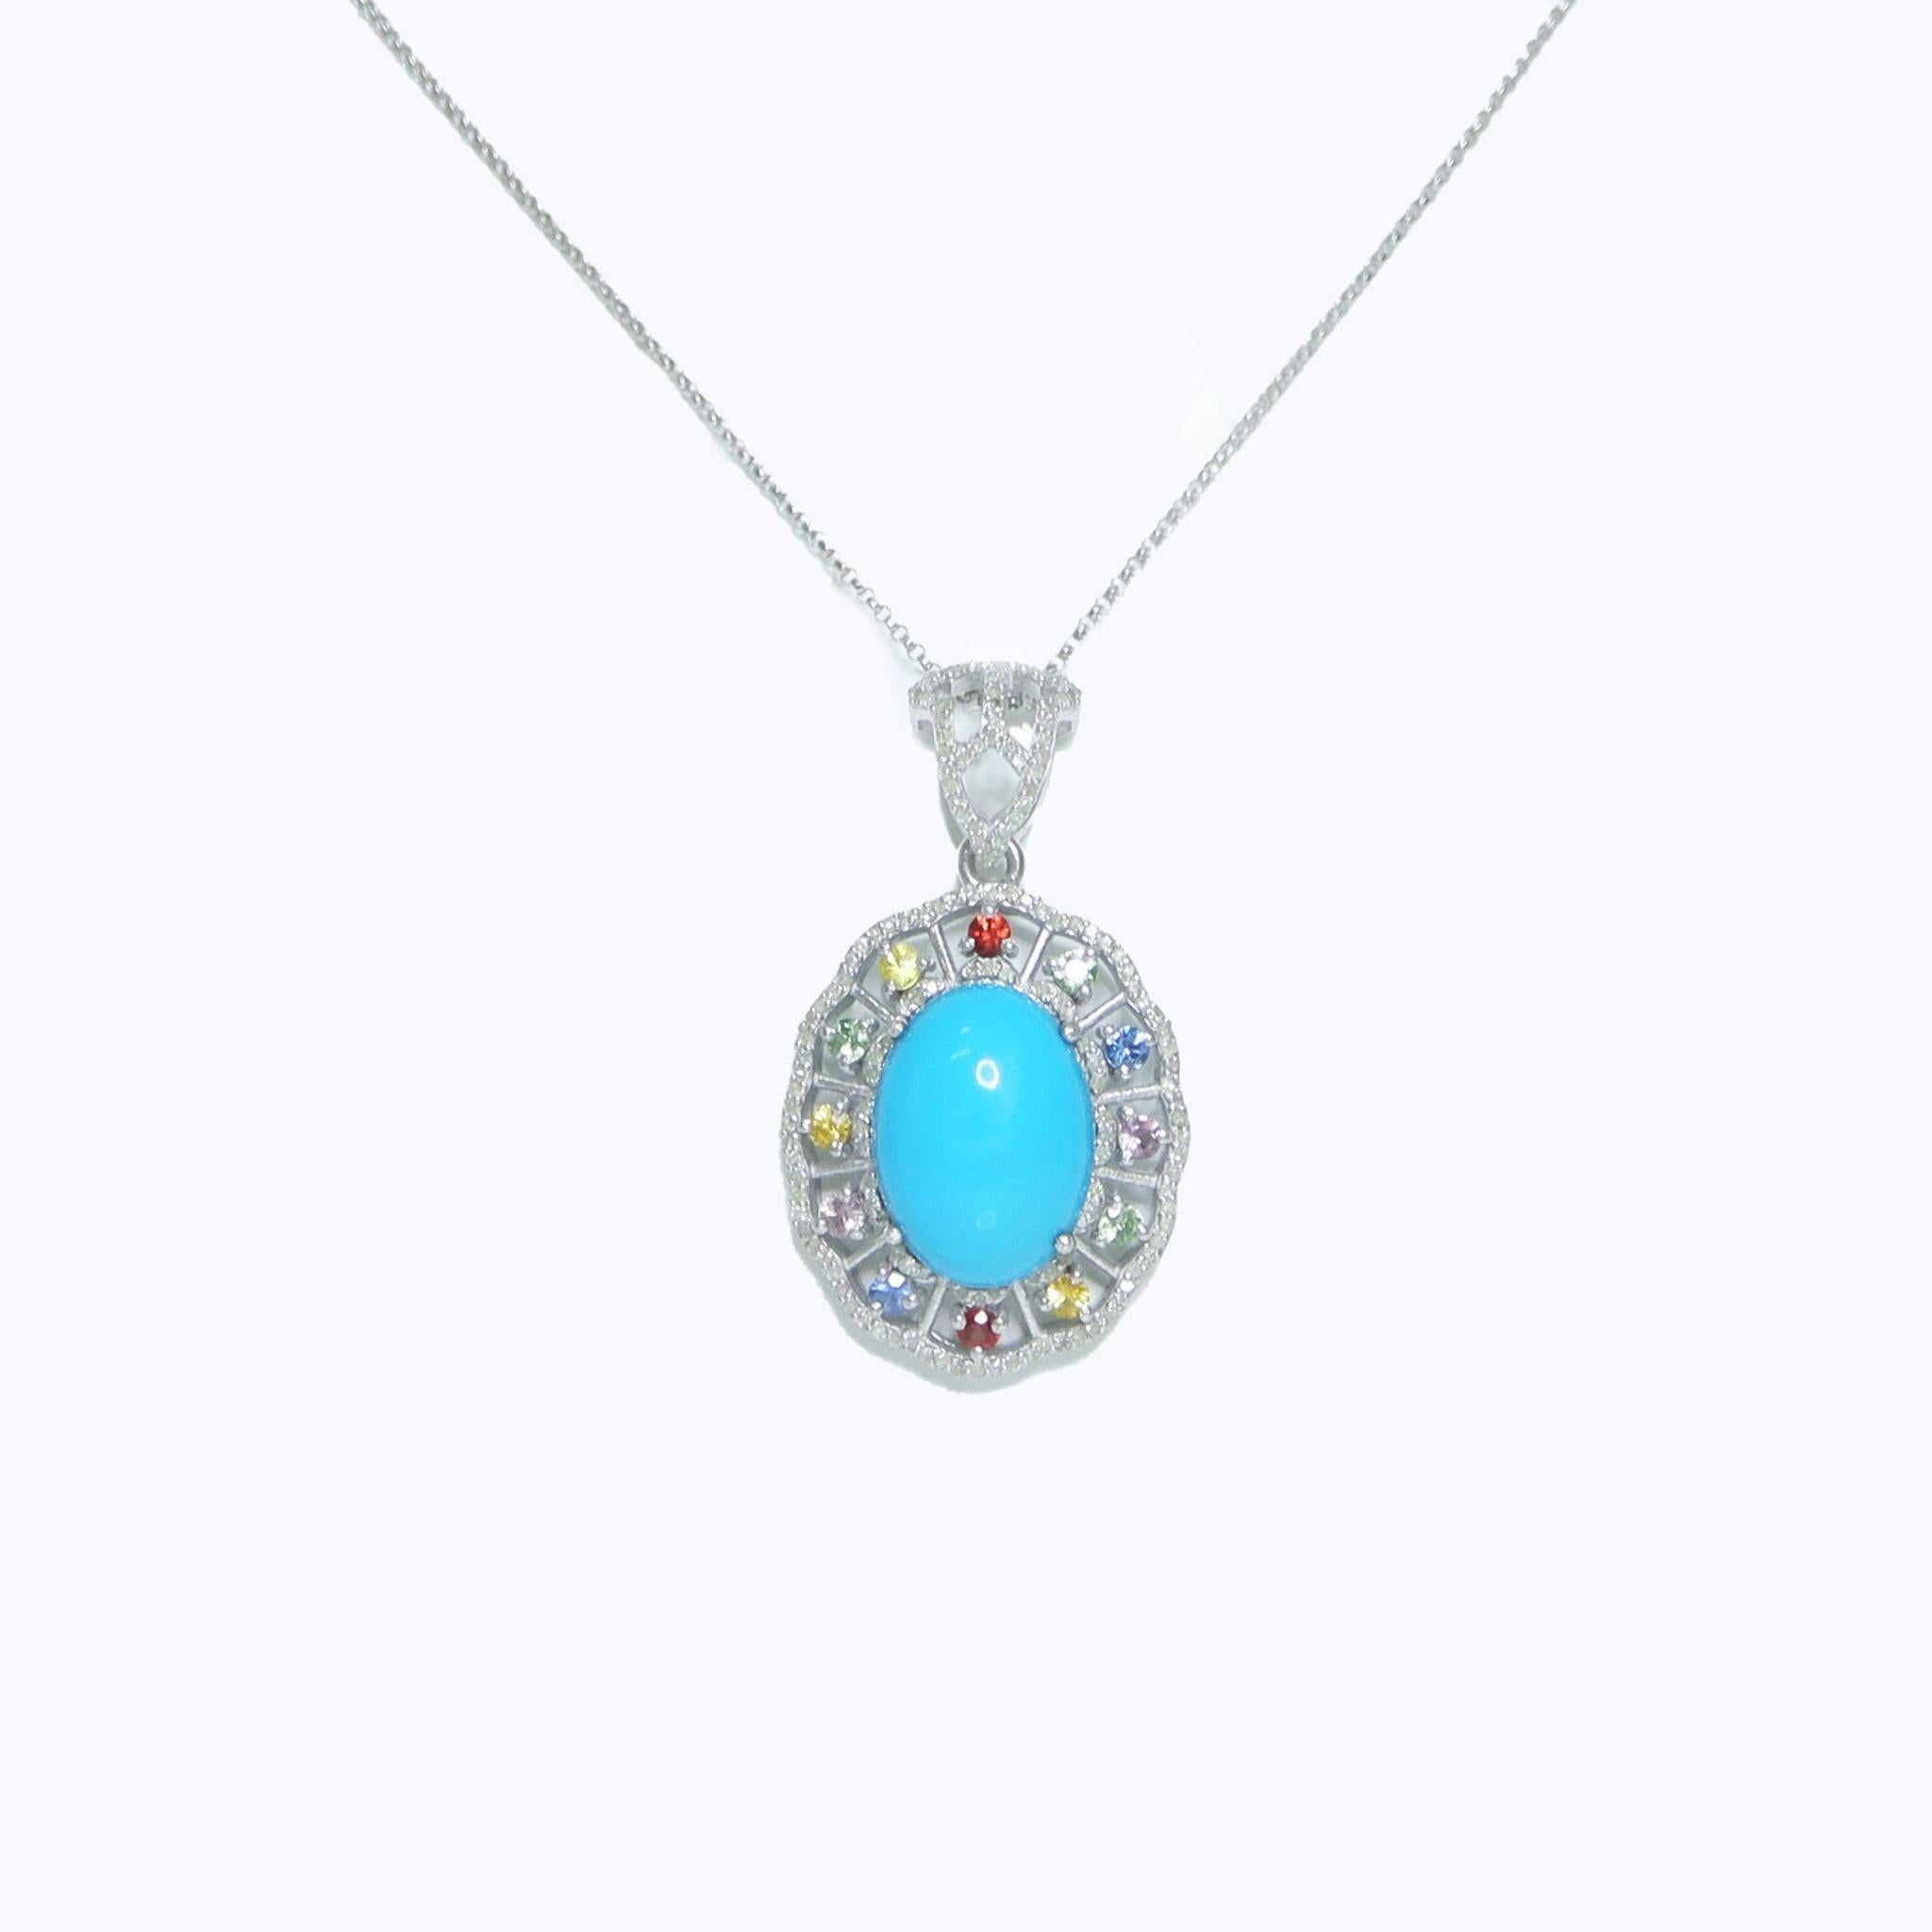 * Silver 11.20 ct  Natural Turquoise Diamonds Antique Pendant Necklace*
This ring features an 11.20-carat natural blue Turquoise set on a silver band and accented with natural HI SI diamonds weighing 0.74 carats and natural sapphires weighing 1.20